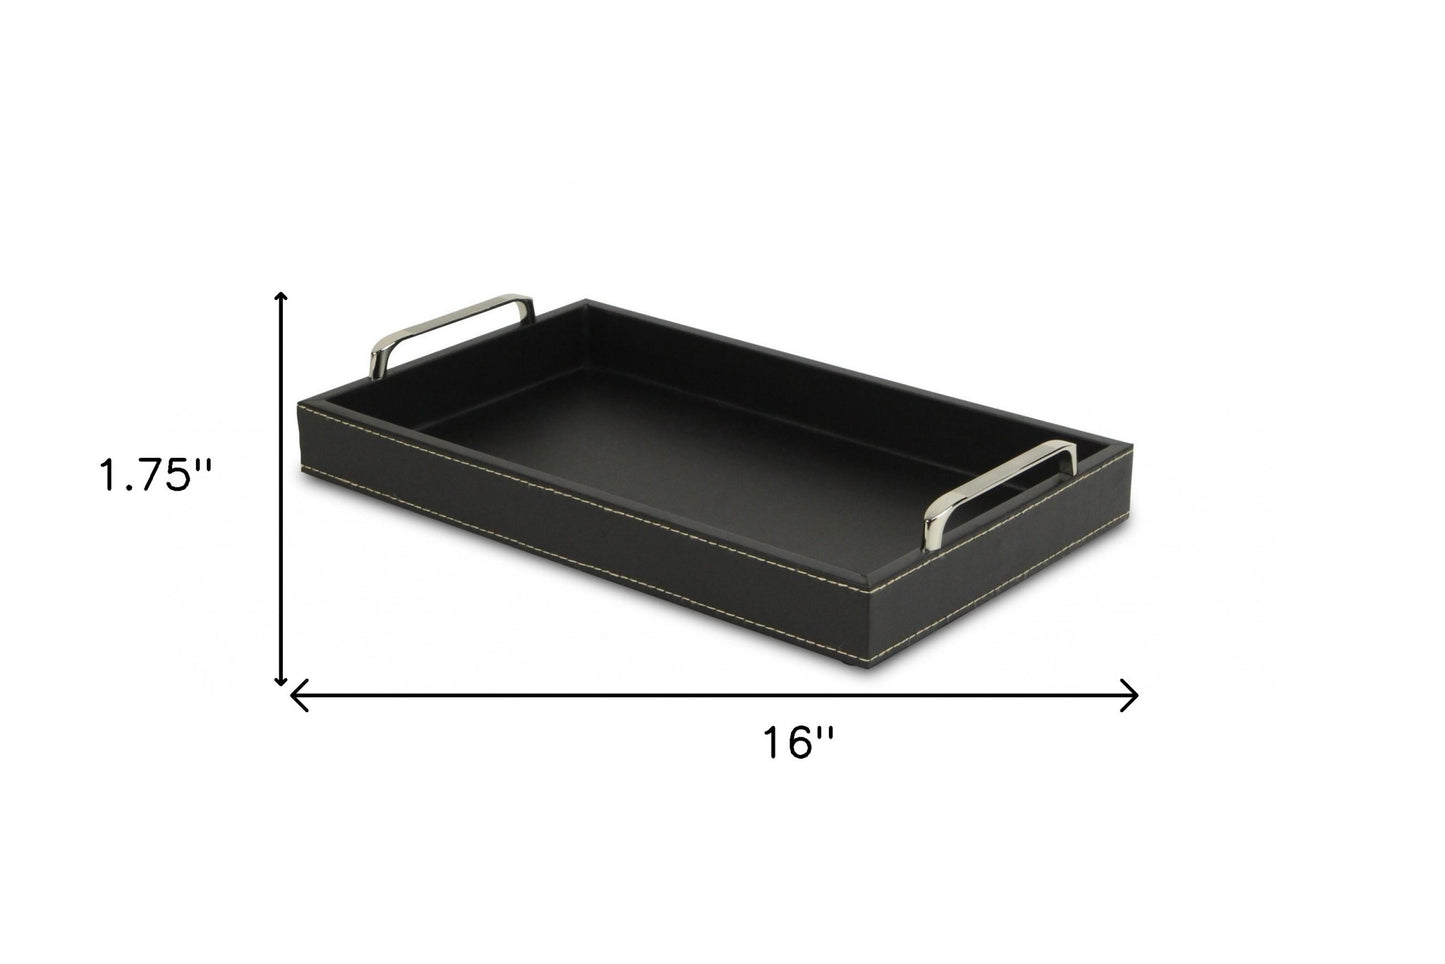 Black Faux Leather Tray with Metal Handles